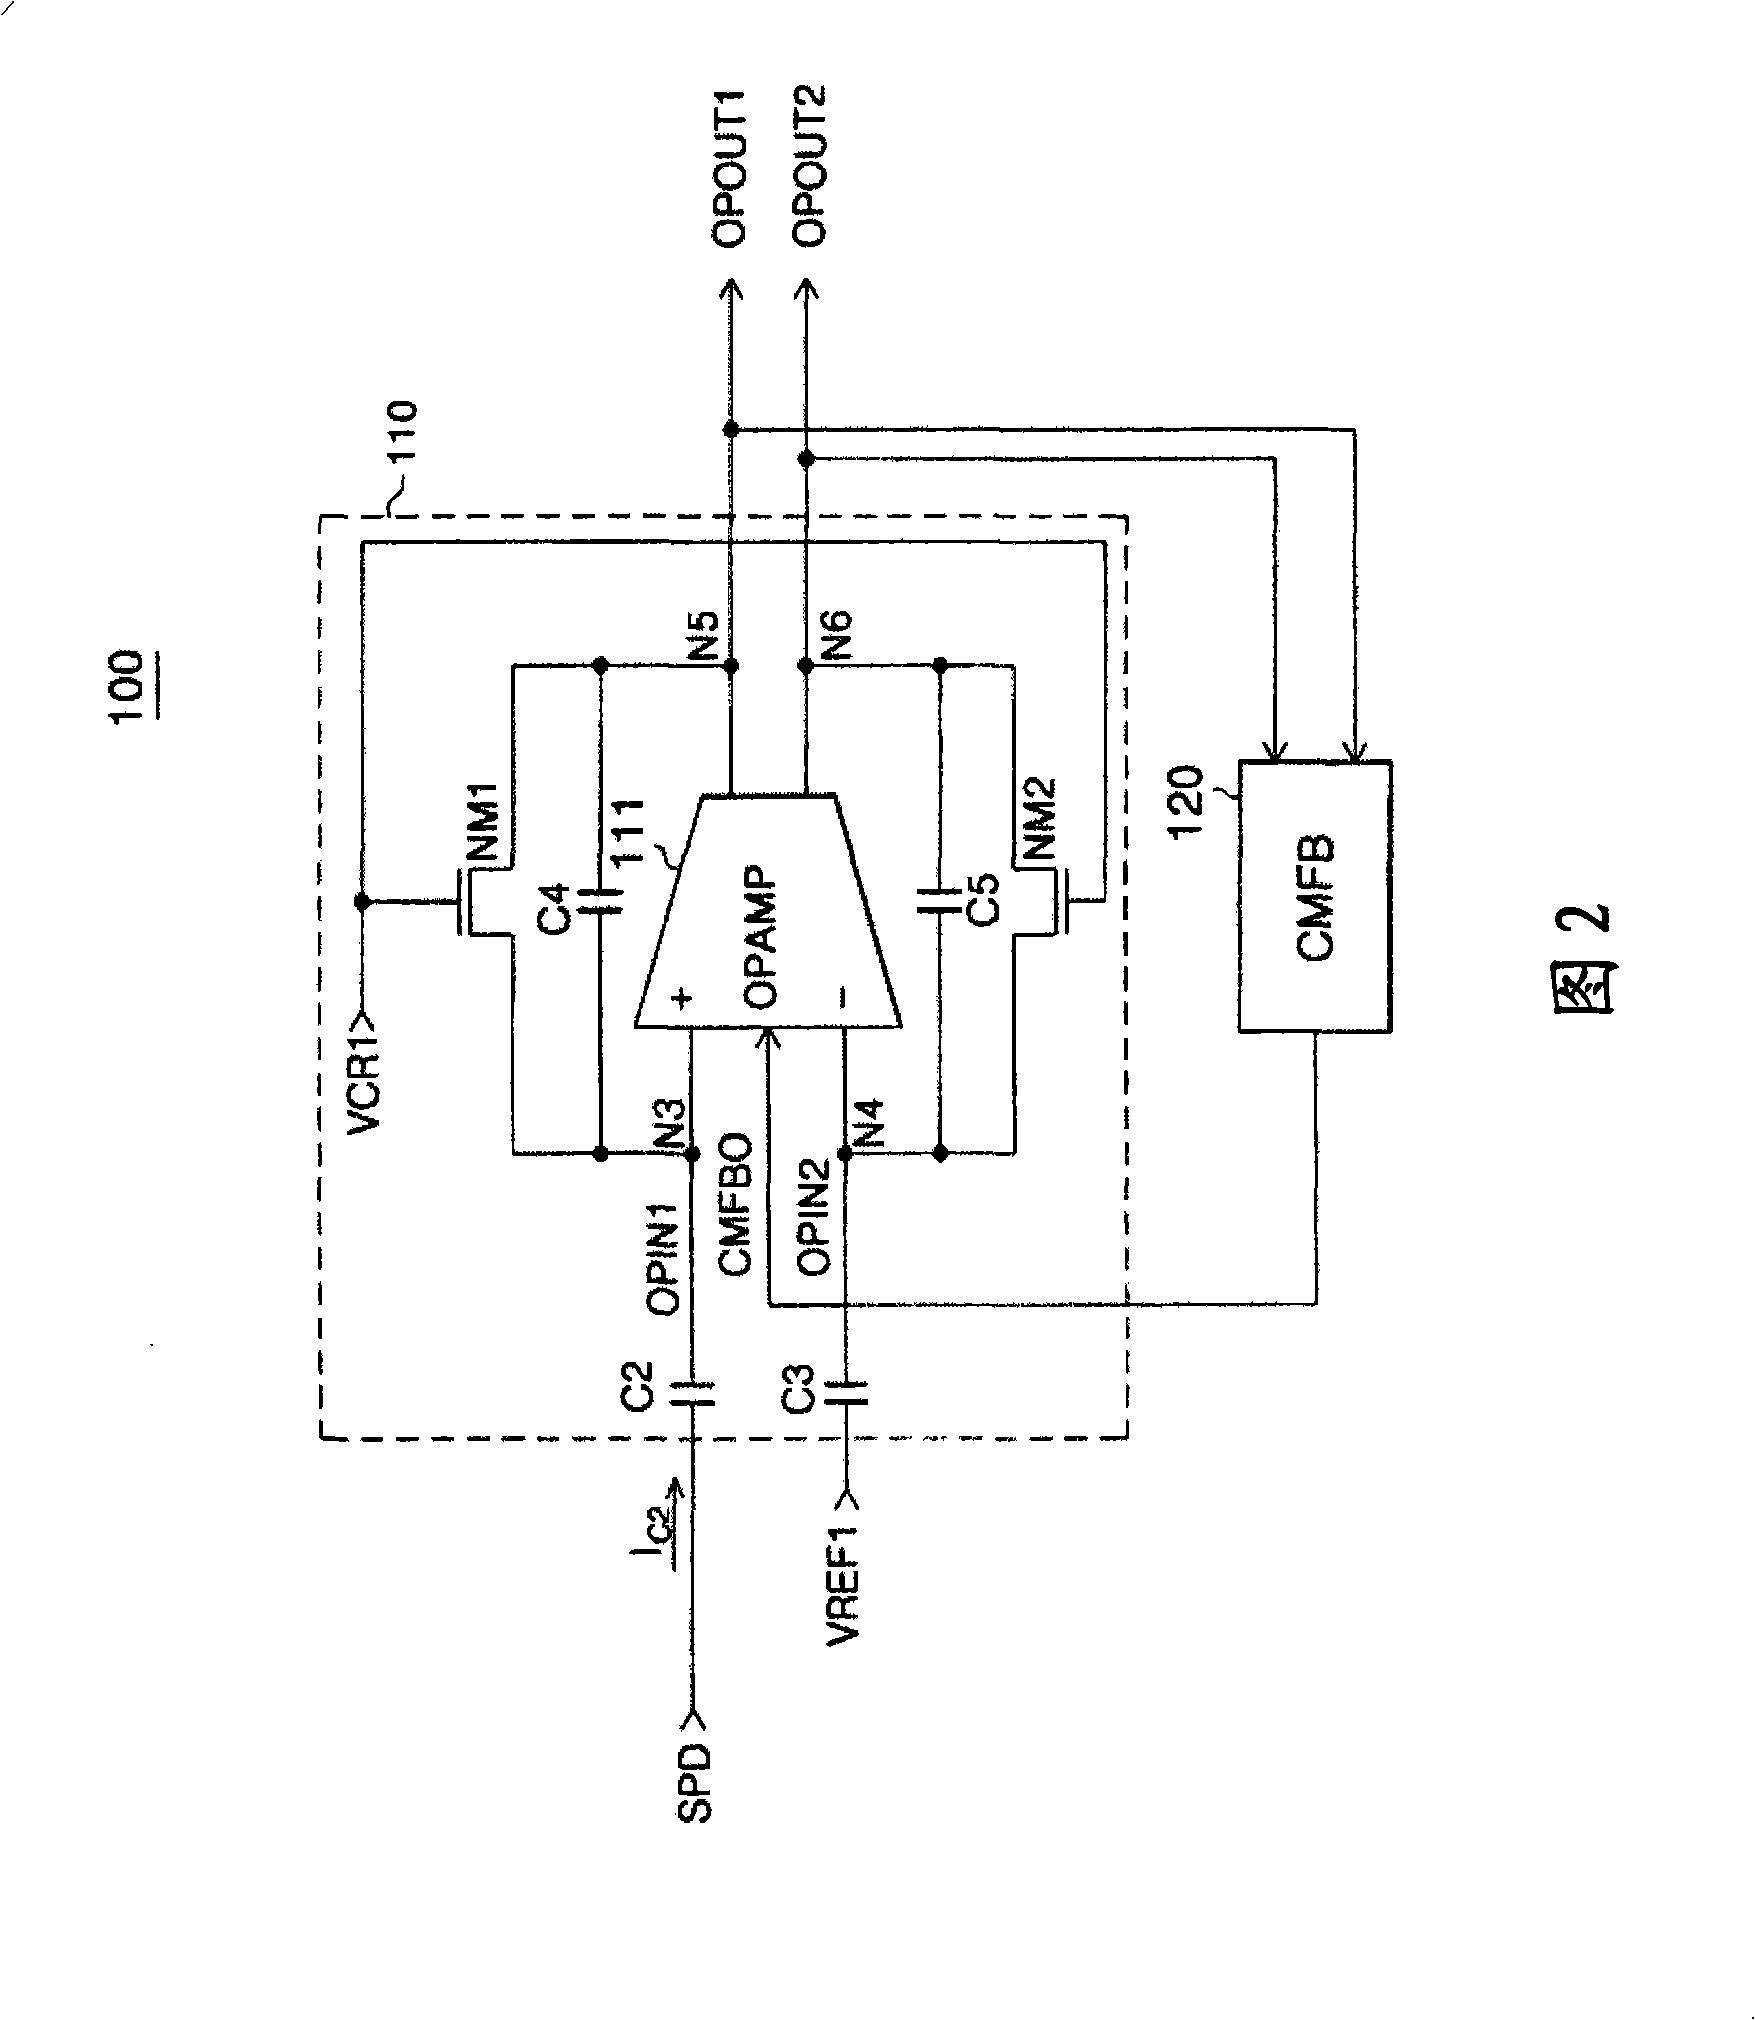 Infrared remote controller receiver having semiconductor signal processing device designed by only CMOS process